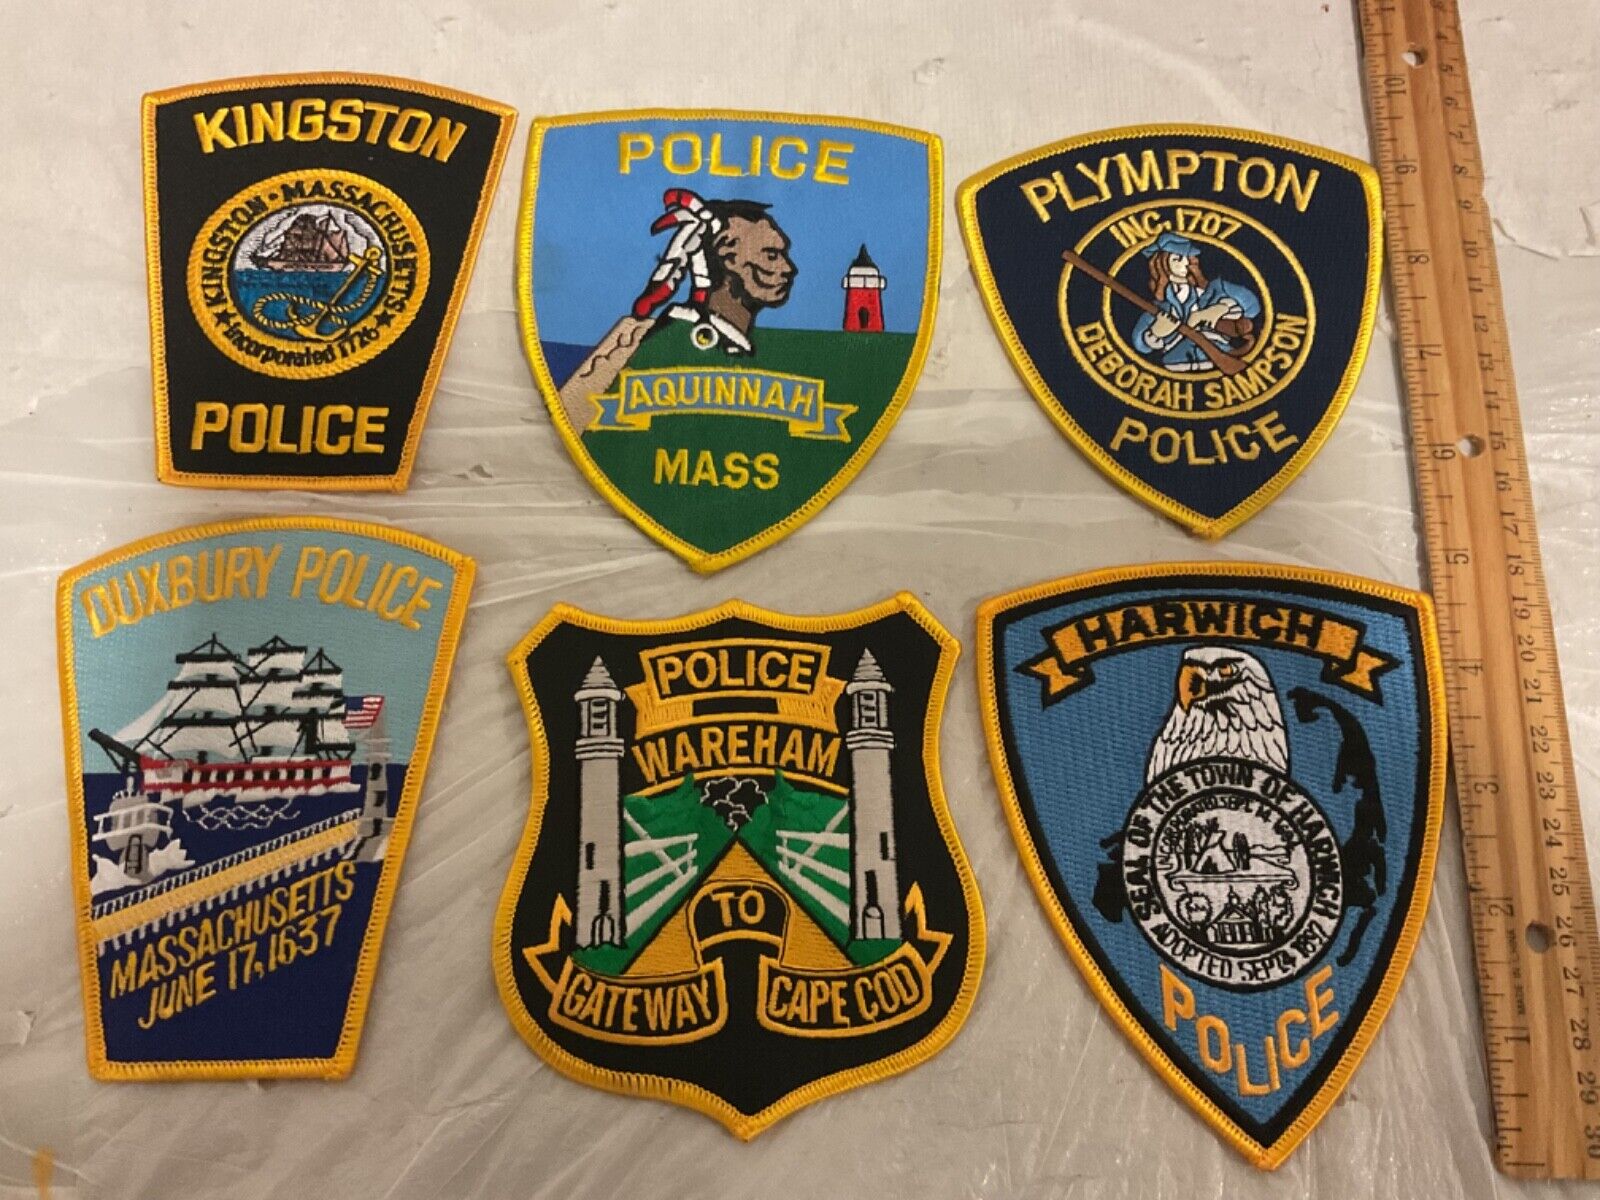 Massachusetts Police collectors patch set 6 pieces all different  patches.